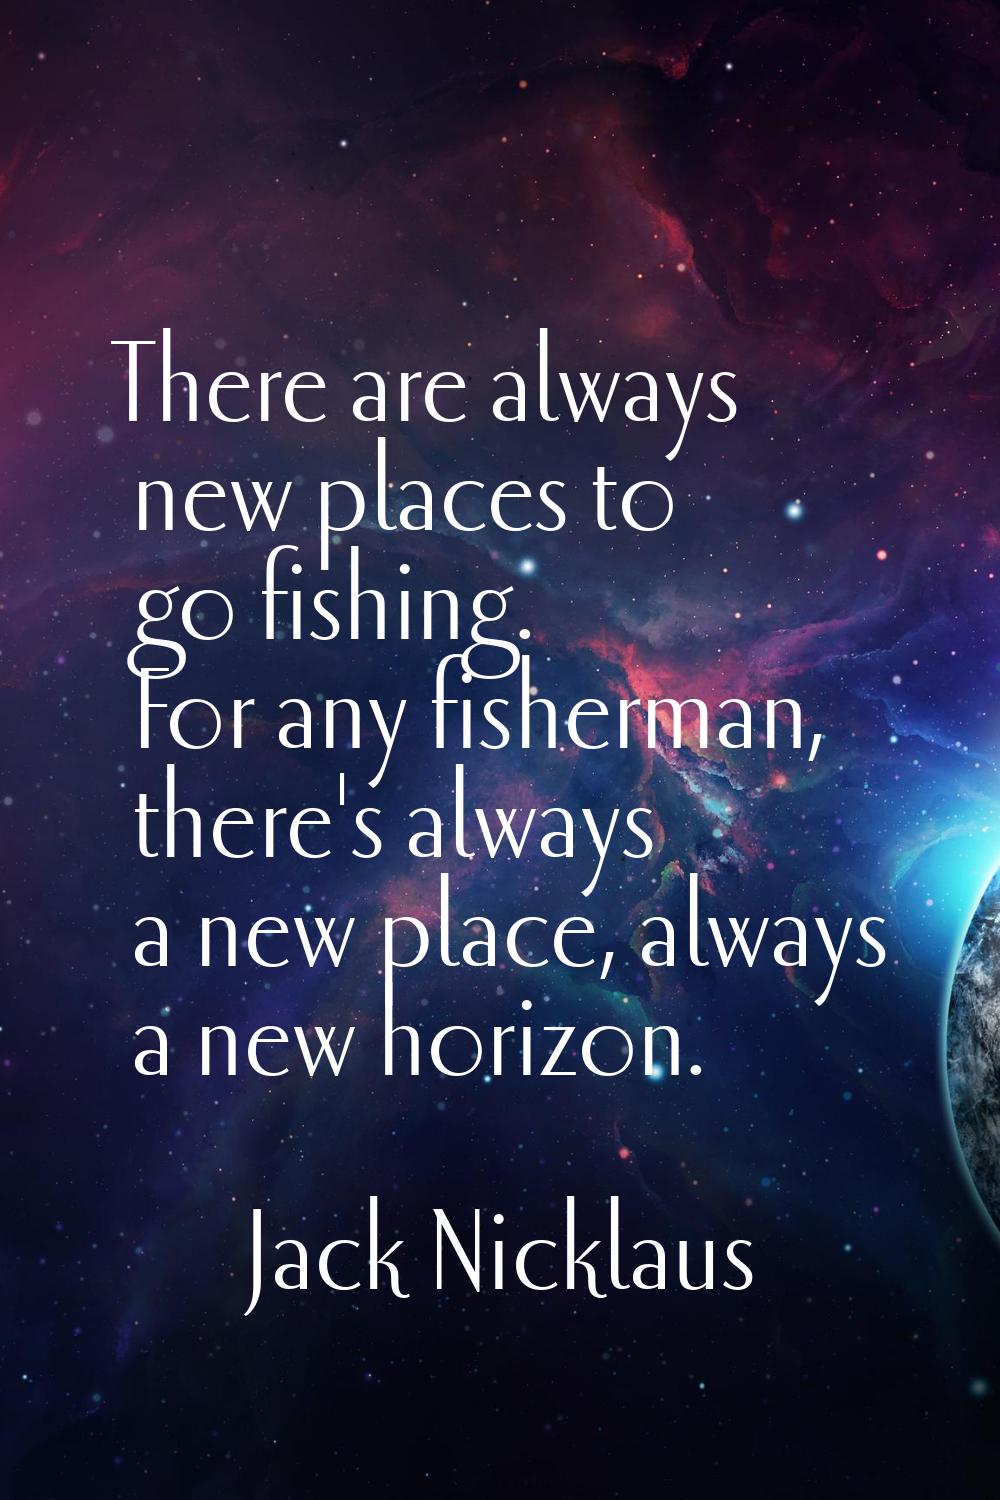 There are always new places to go fishing. For any fisherman, there's always a new place, always a 